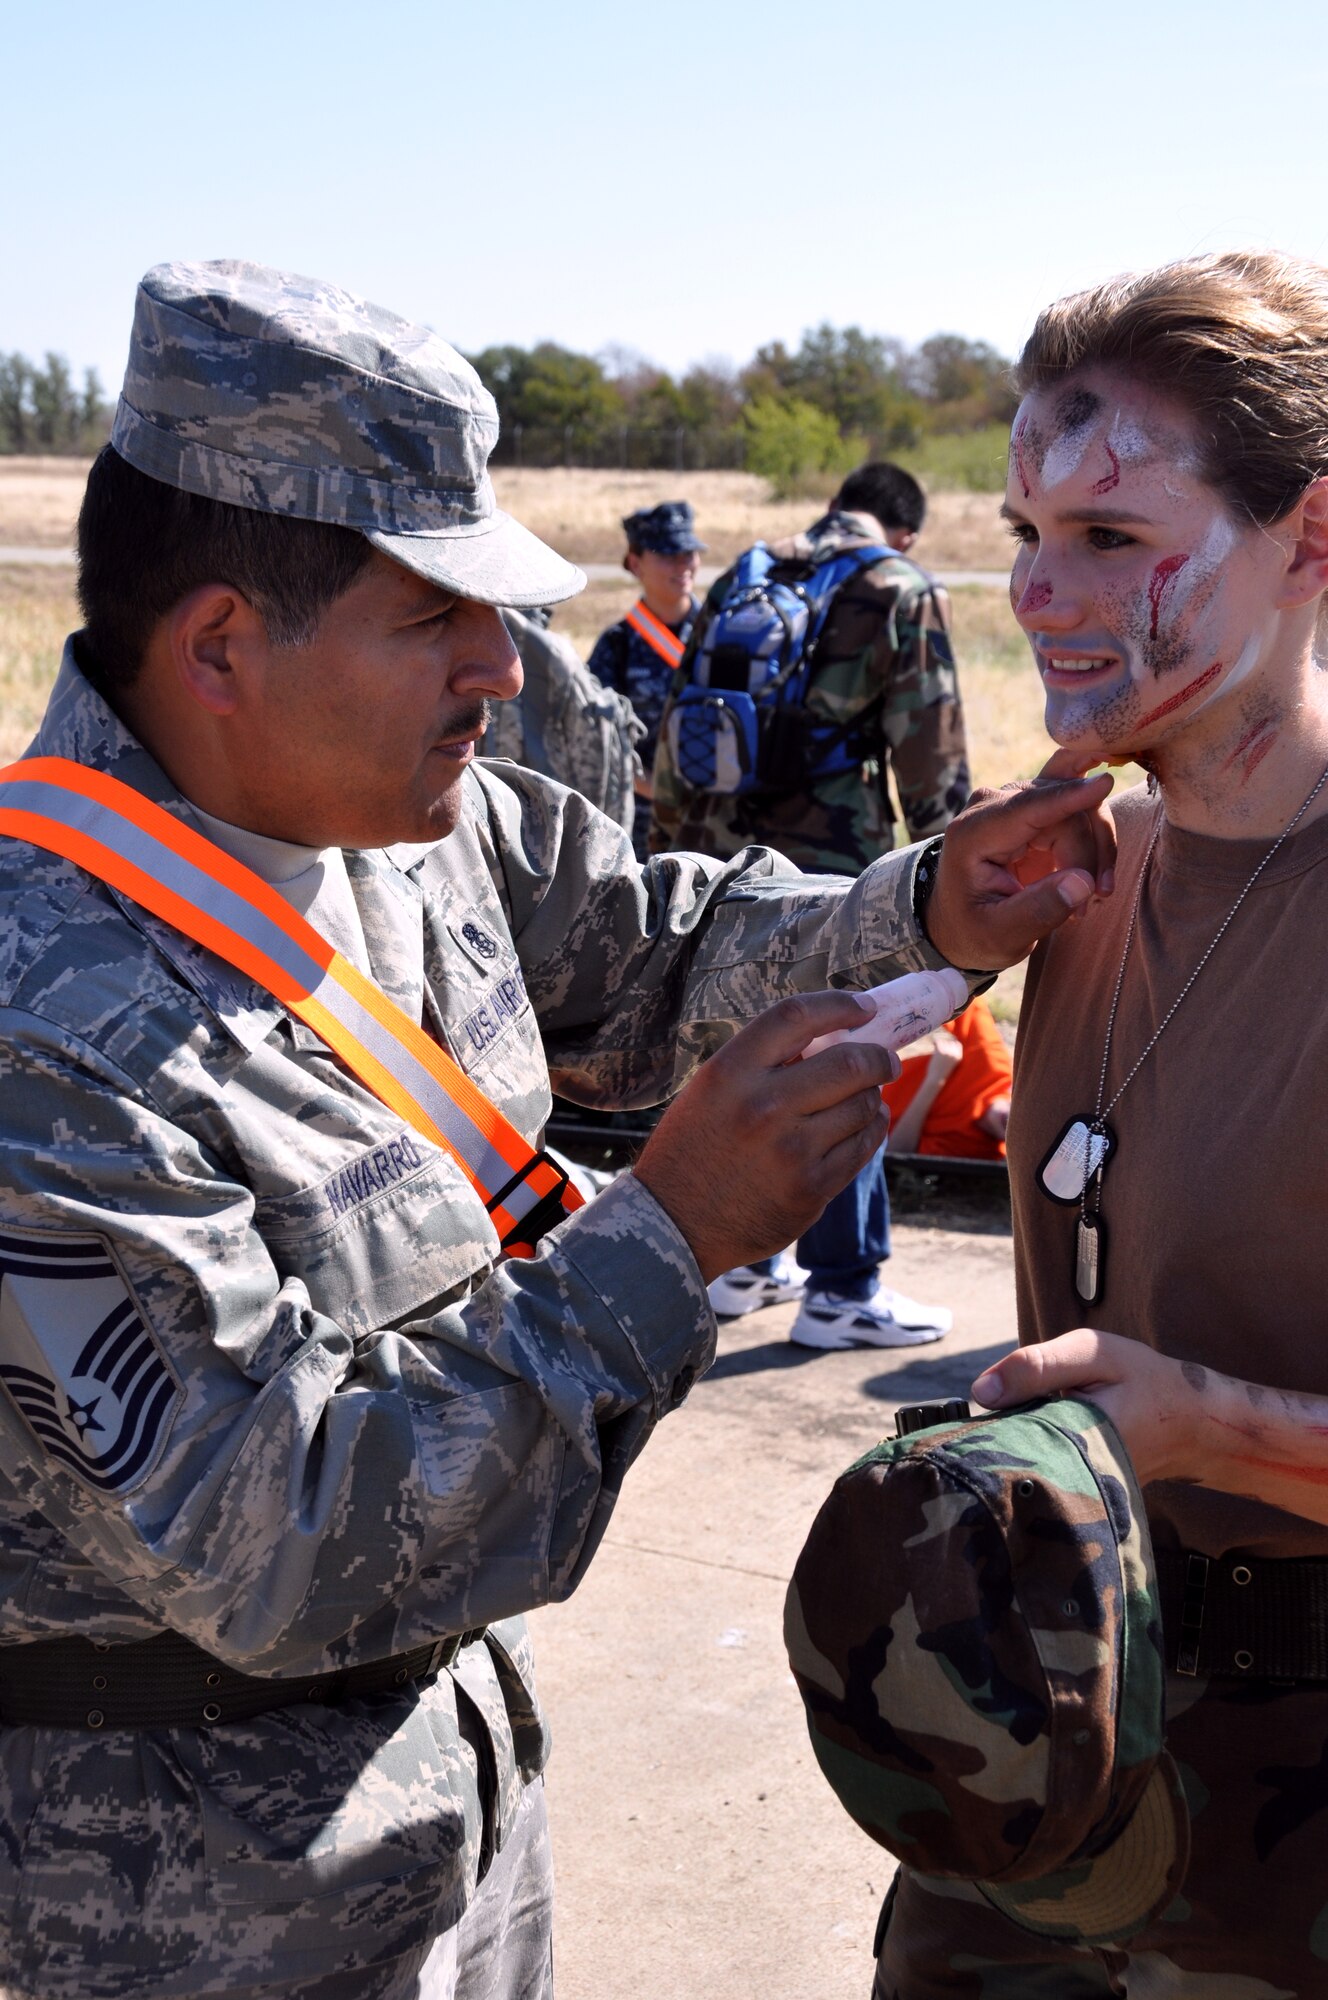 Senior Master Sgt.Tony Navarro, 301st Medical Squadron technician, applies moulage to Civil Air Patrol cadet Jessica Bearden in preparation for the joint Mass Casualty Exercise held at the Army Reserve Center, Fort Worth, September 10 and 11. CAP cadets acted as injured personnel during the two-day exercise which pulled together military and civilian units and emergency responders from around the area.  (U.S. Air Force photo/Staff Sgt Chris Bolen)